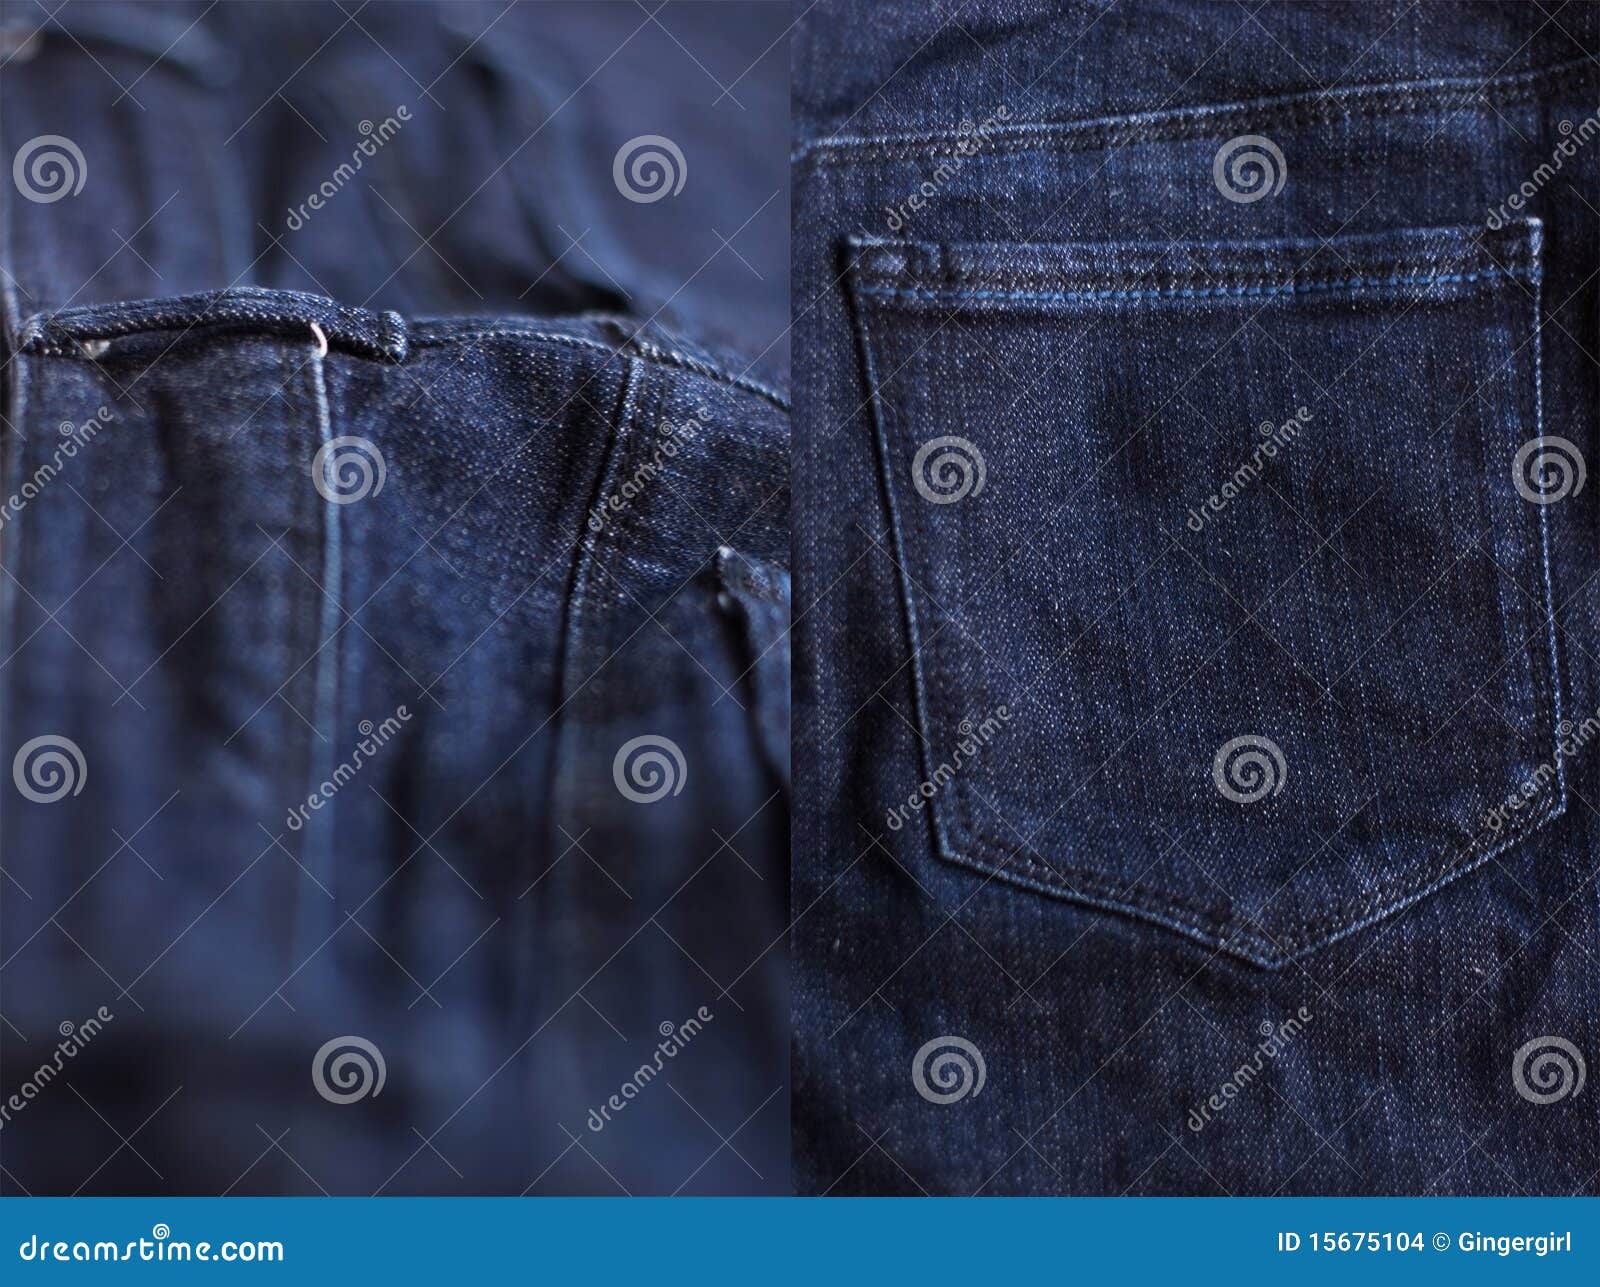 Jeans background stock photo. Image of simplicity, close - 15675104